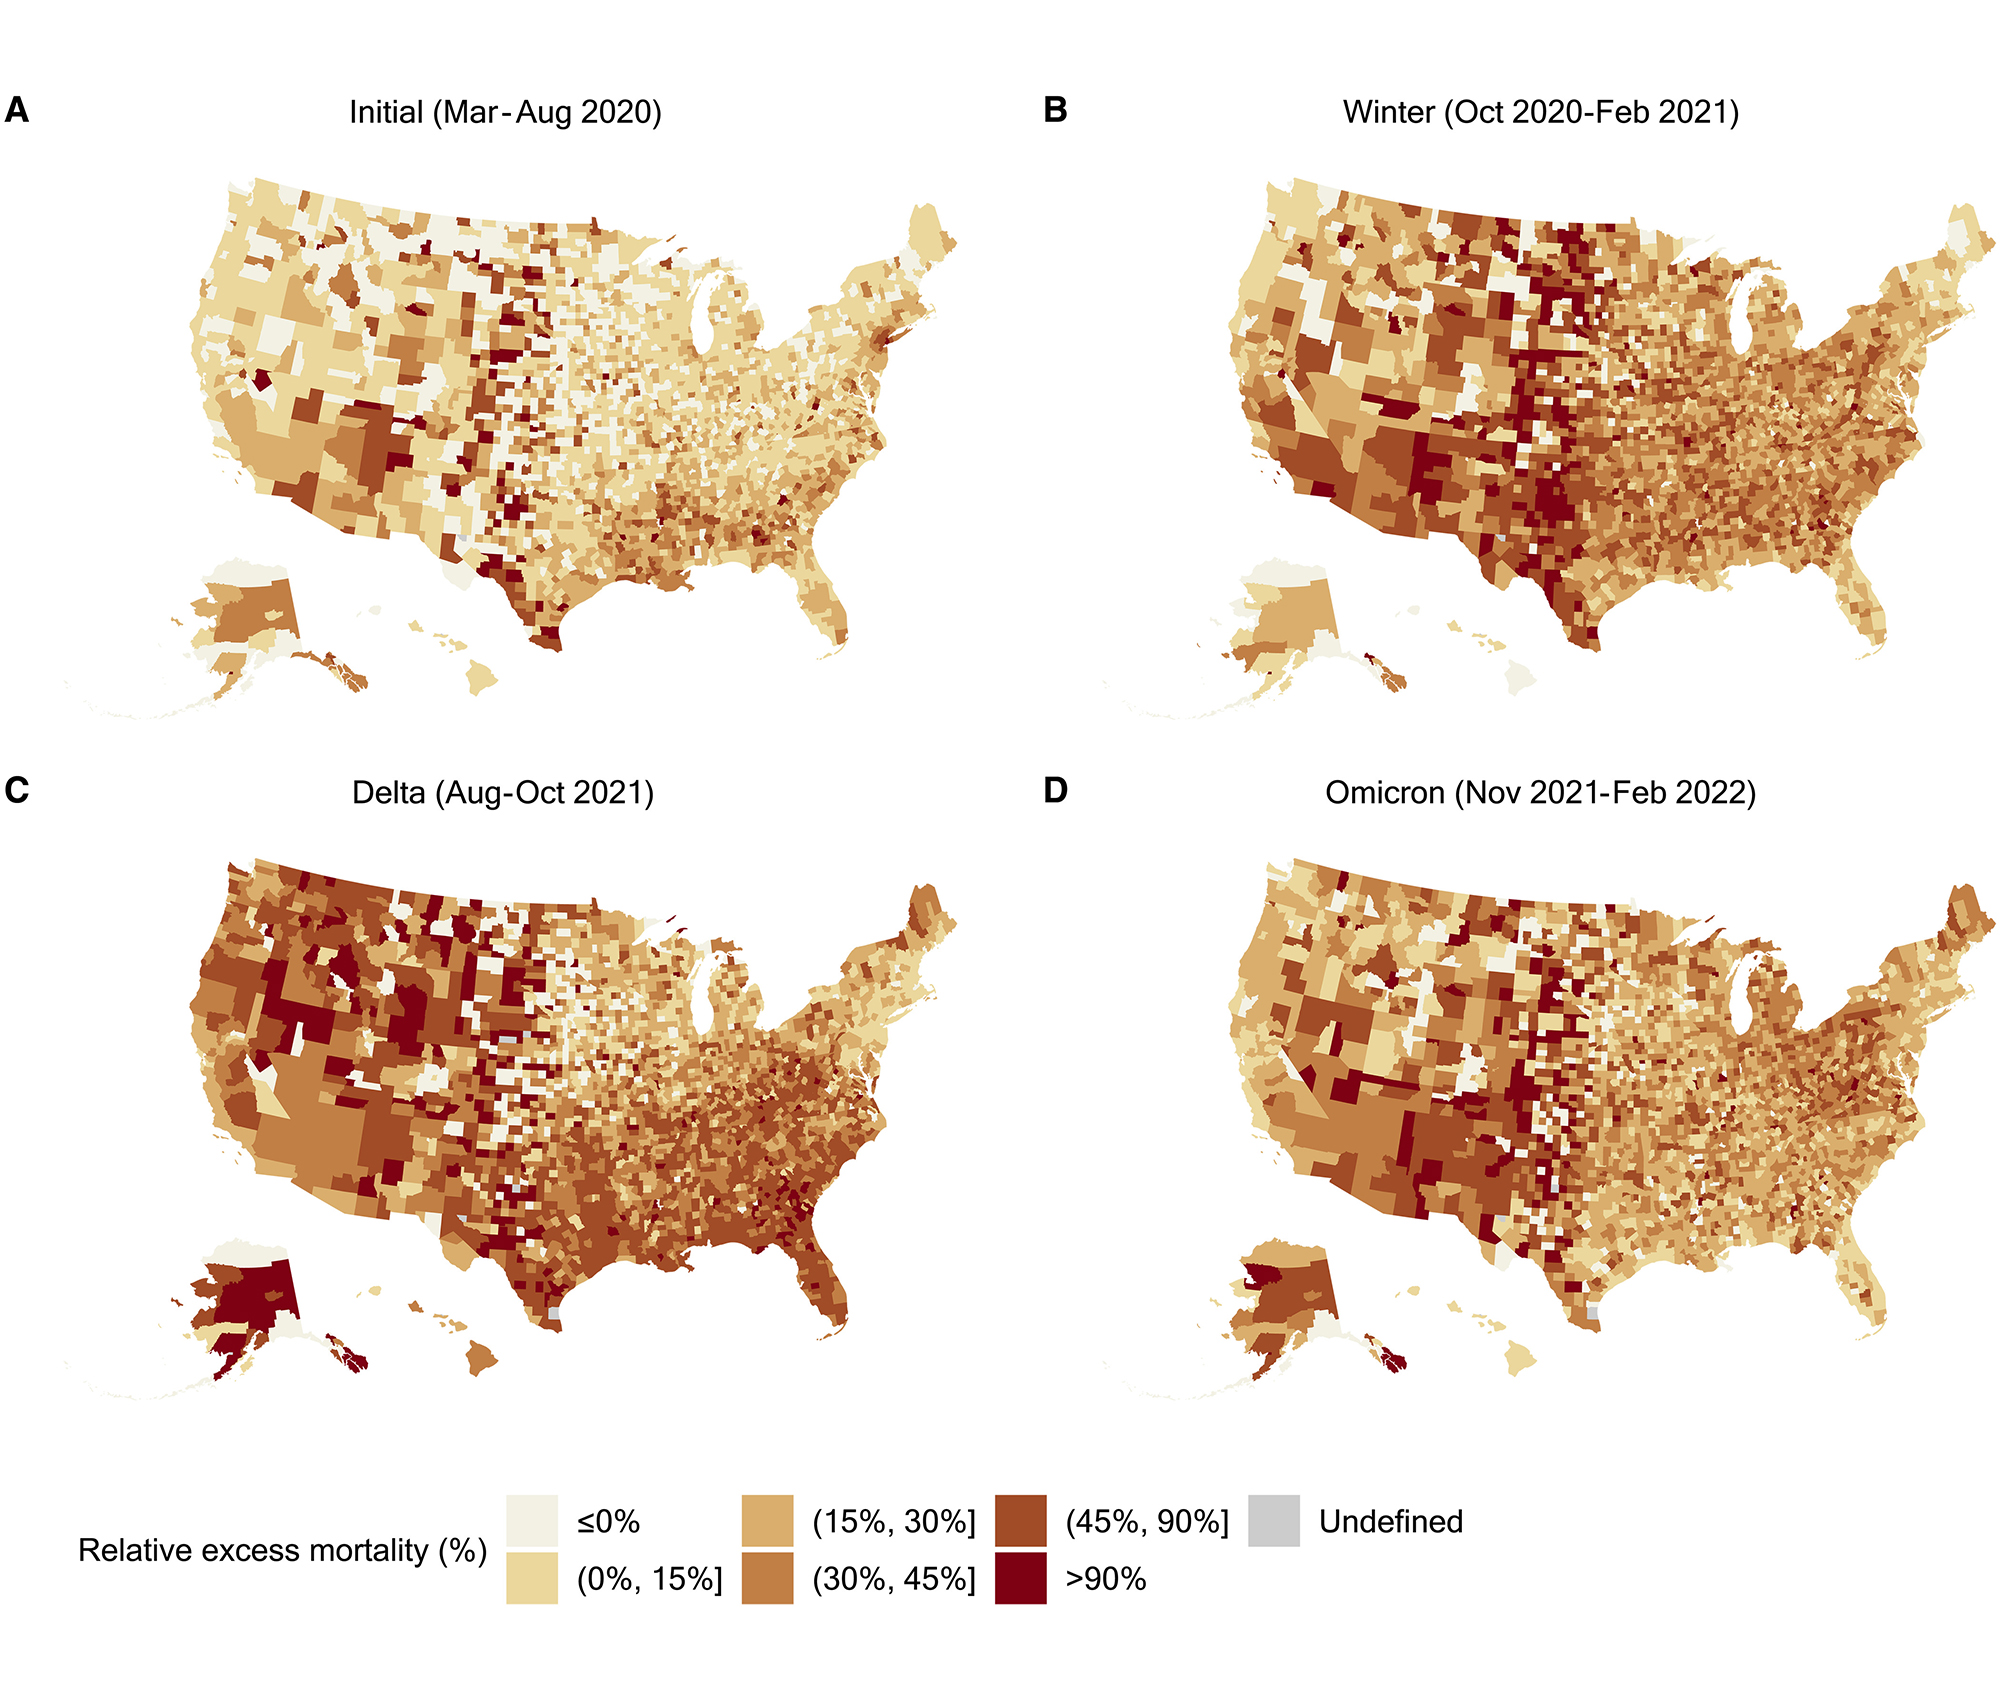 Four maps of the U.S. indicating excess mortality by county.